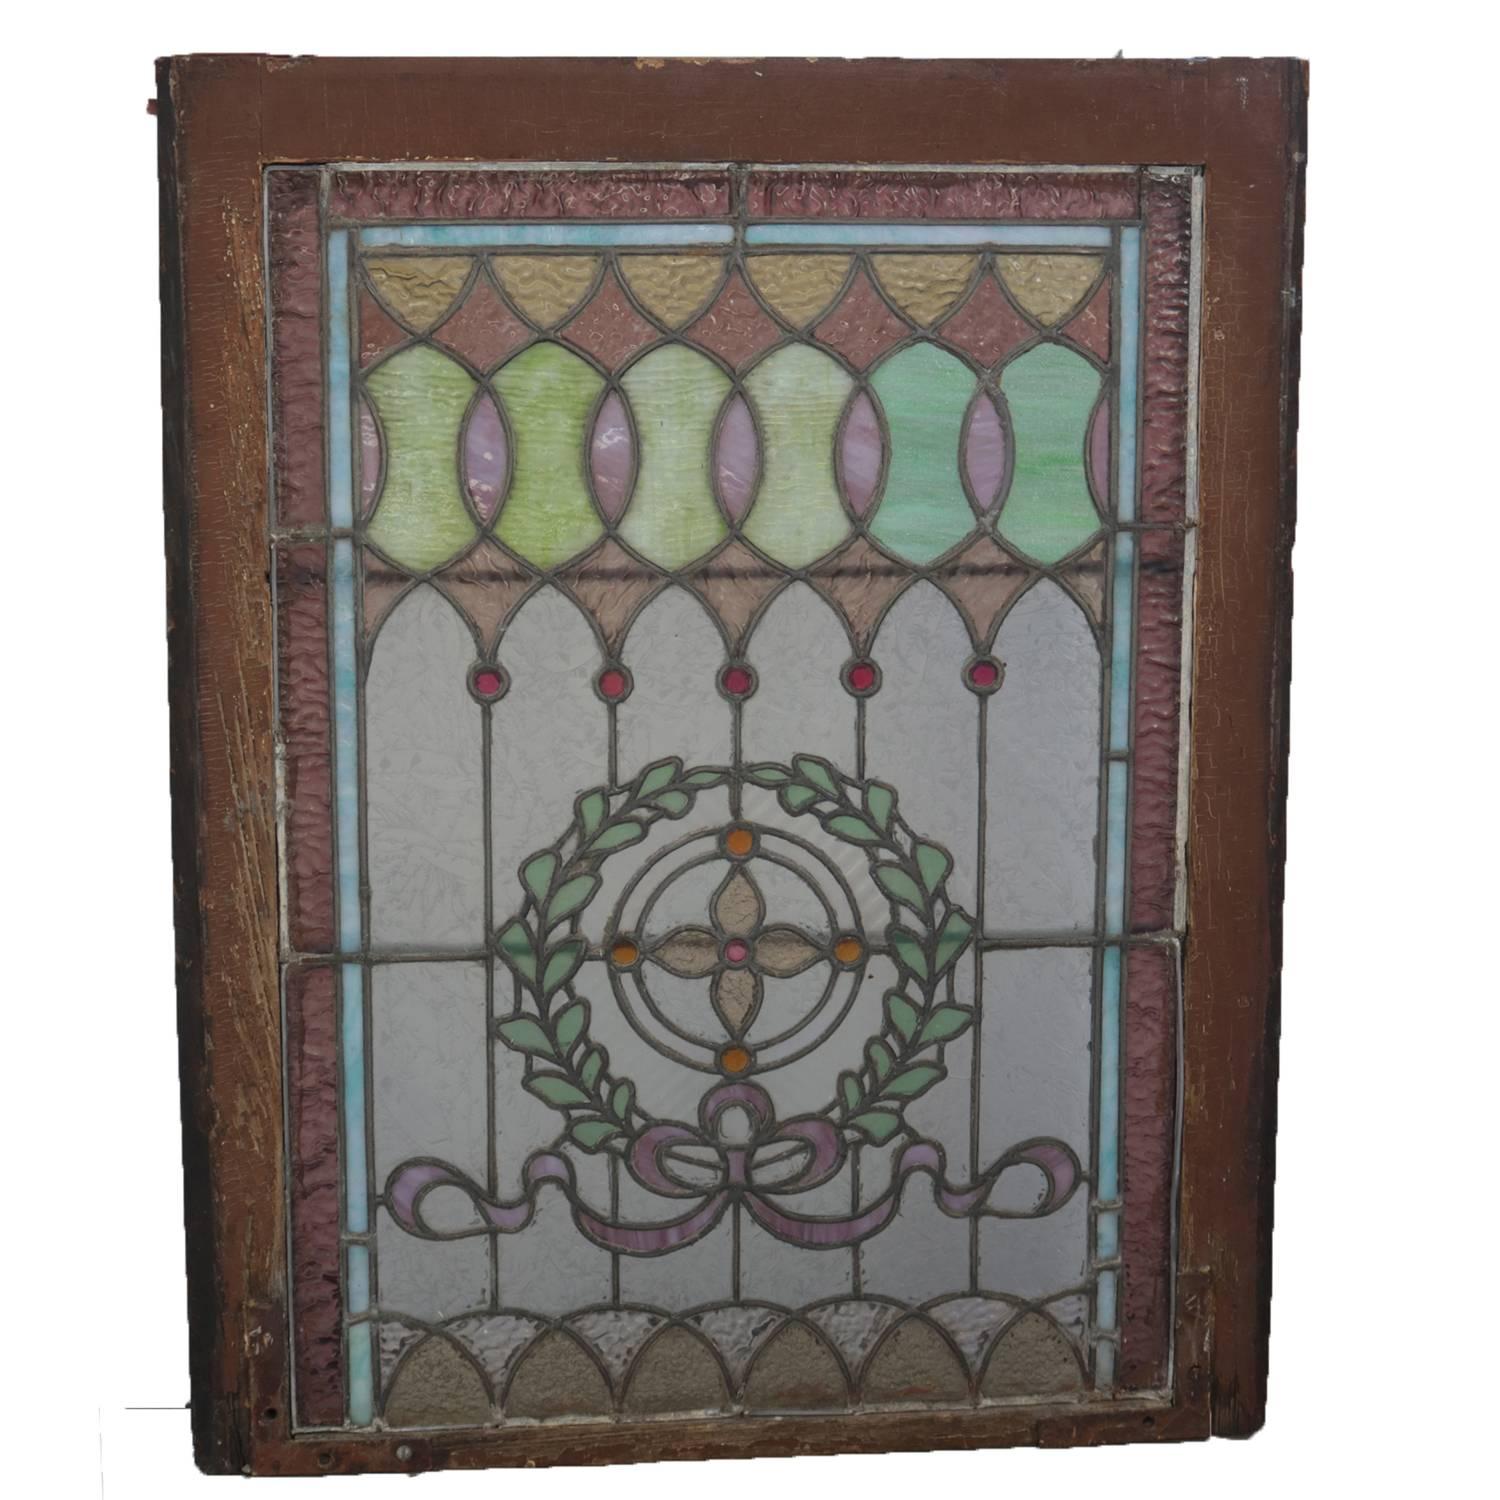 Antique architectural framed leaded mosaic stained and jewelled glass window features laurel wreath with stylized central flower and bow, circa 1880.

Measures: 31.5